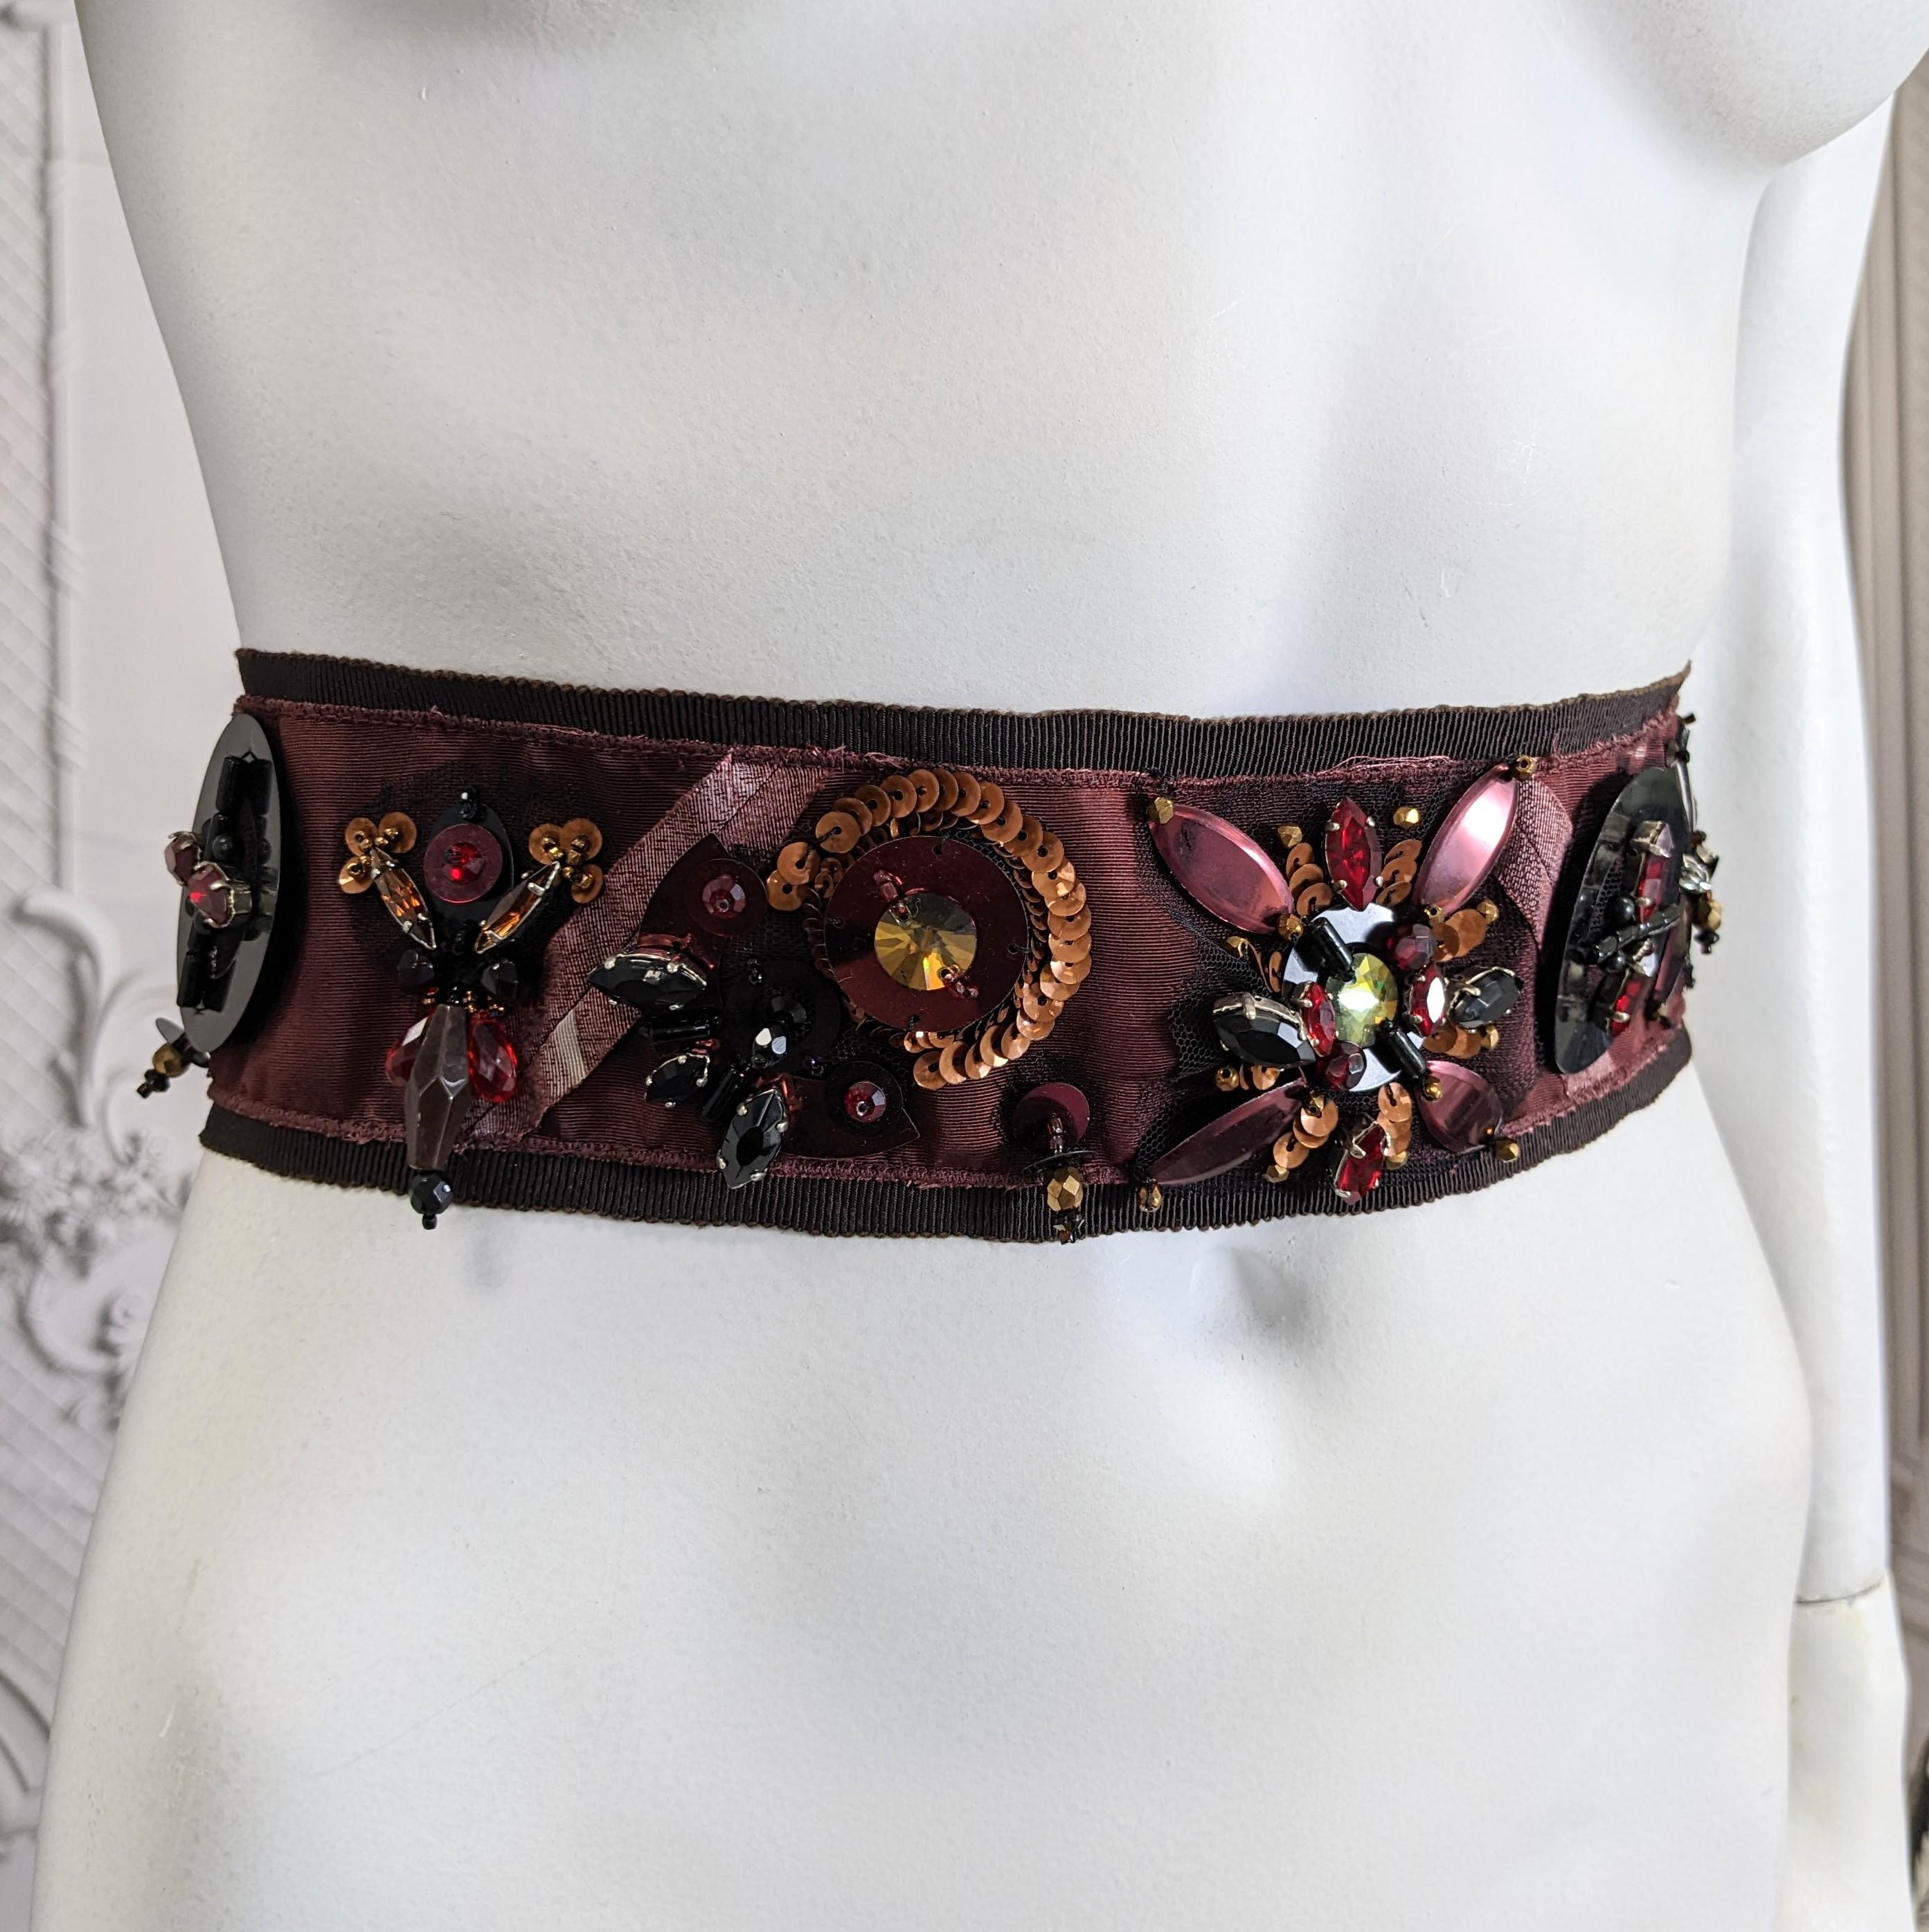 Prada Jeweled Grosgrain Belt In Good Condition For Sale In New York, NY